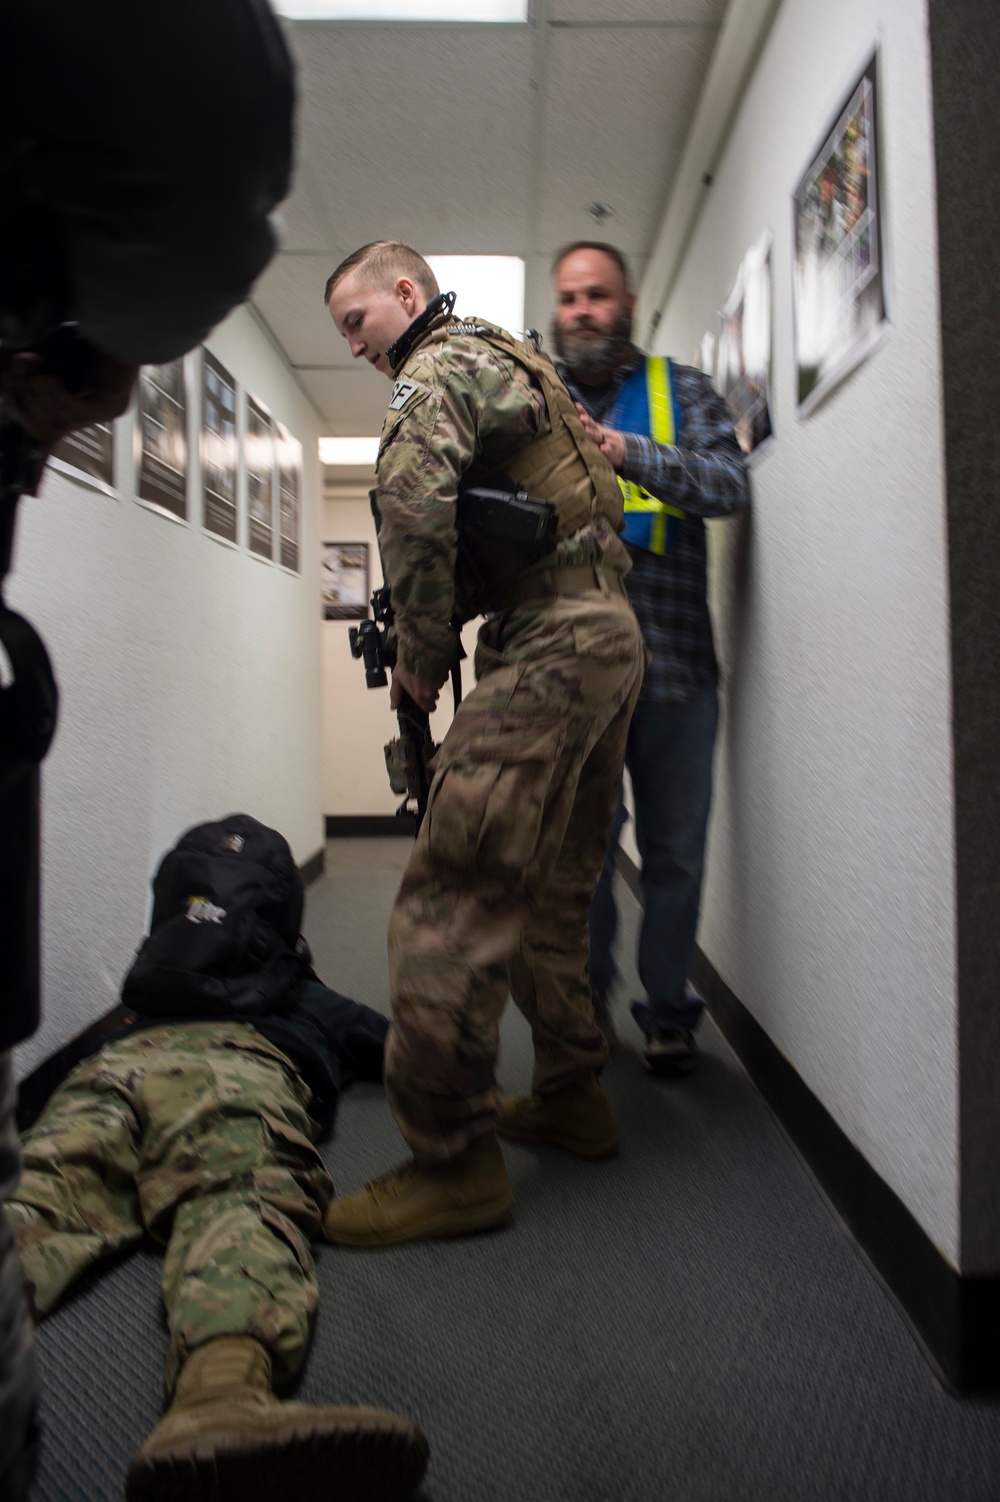 JBER defenders respond to a simulated active shooter